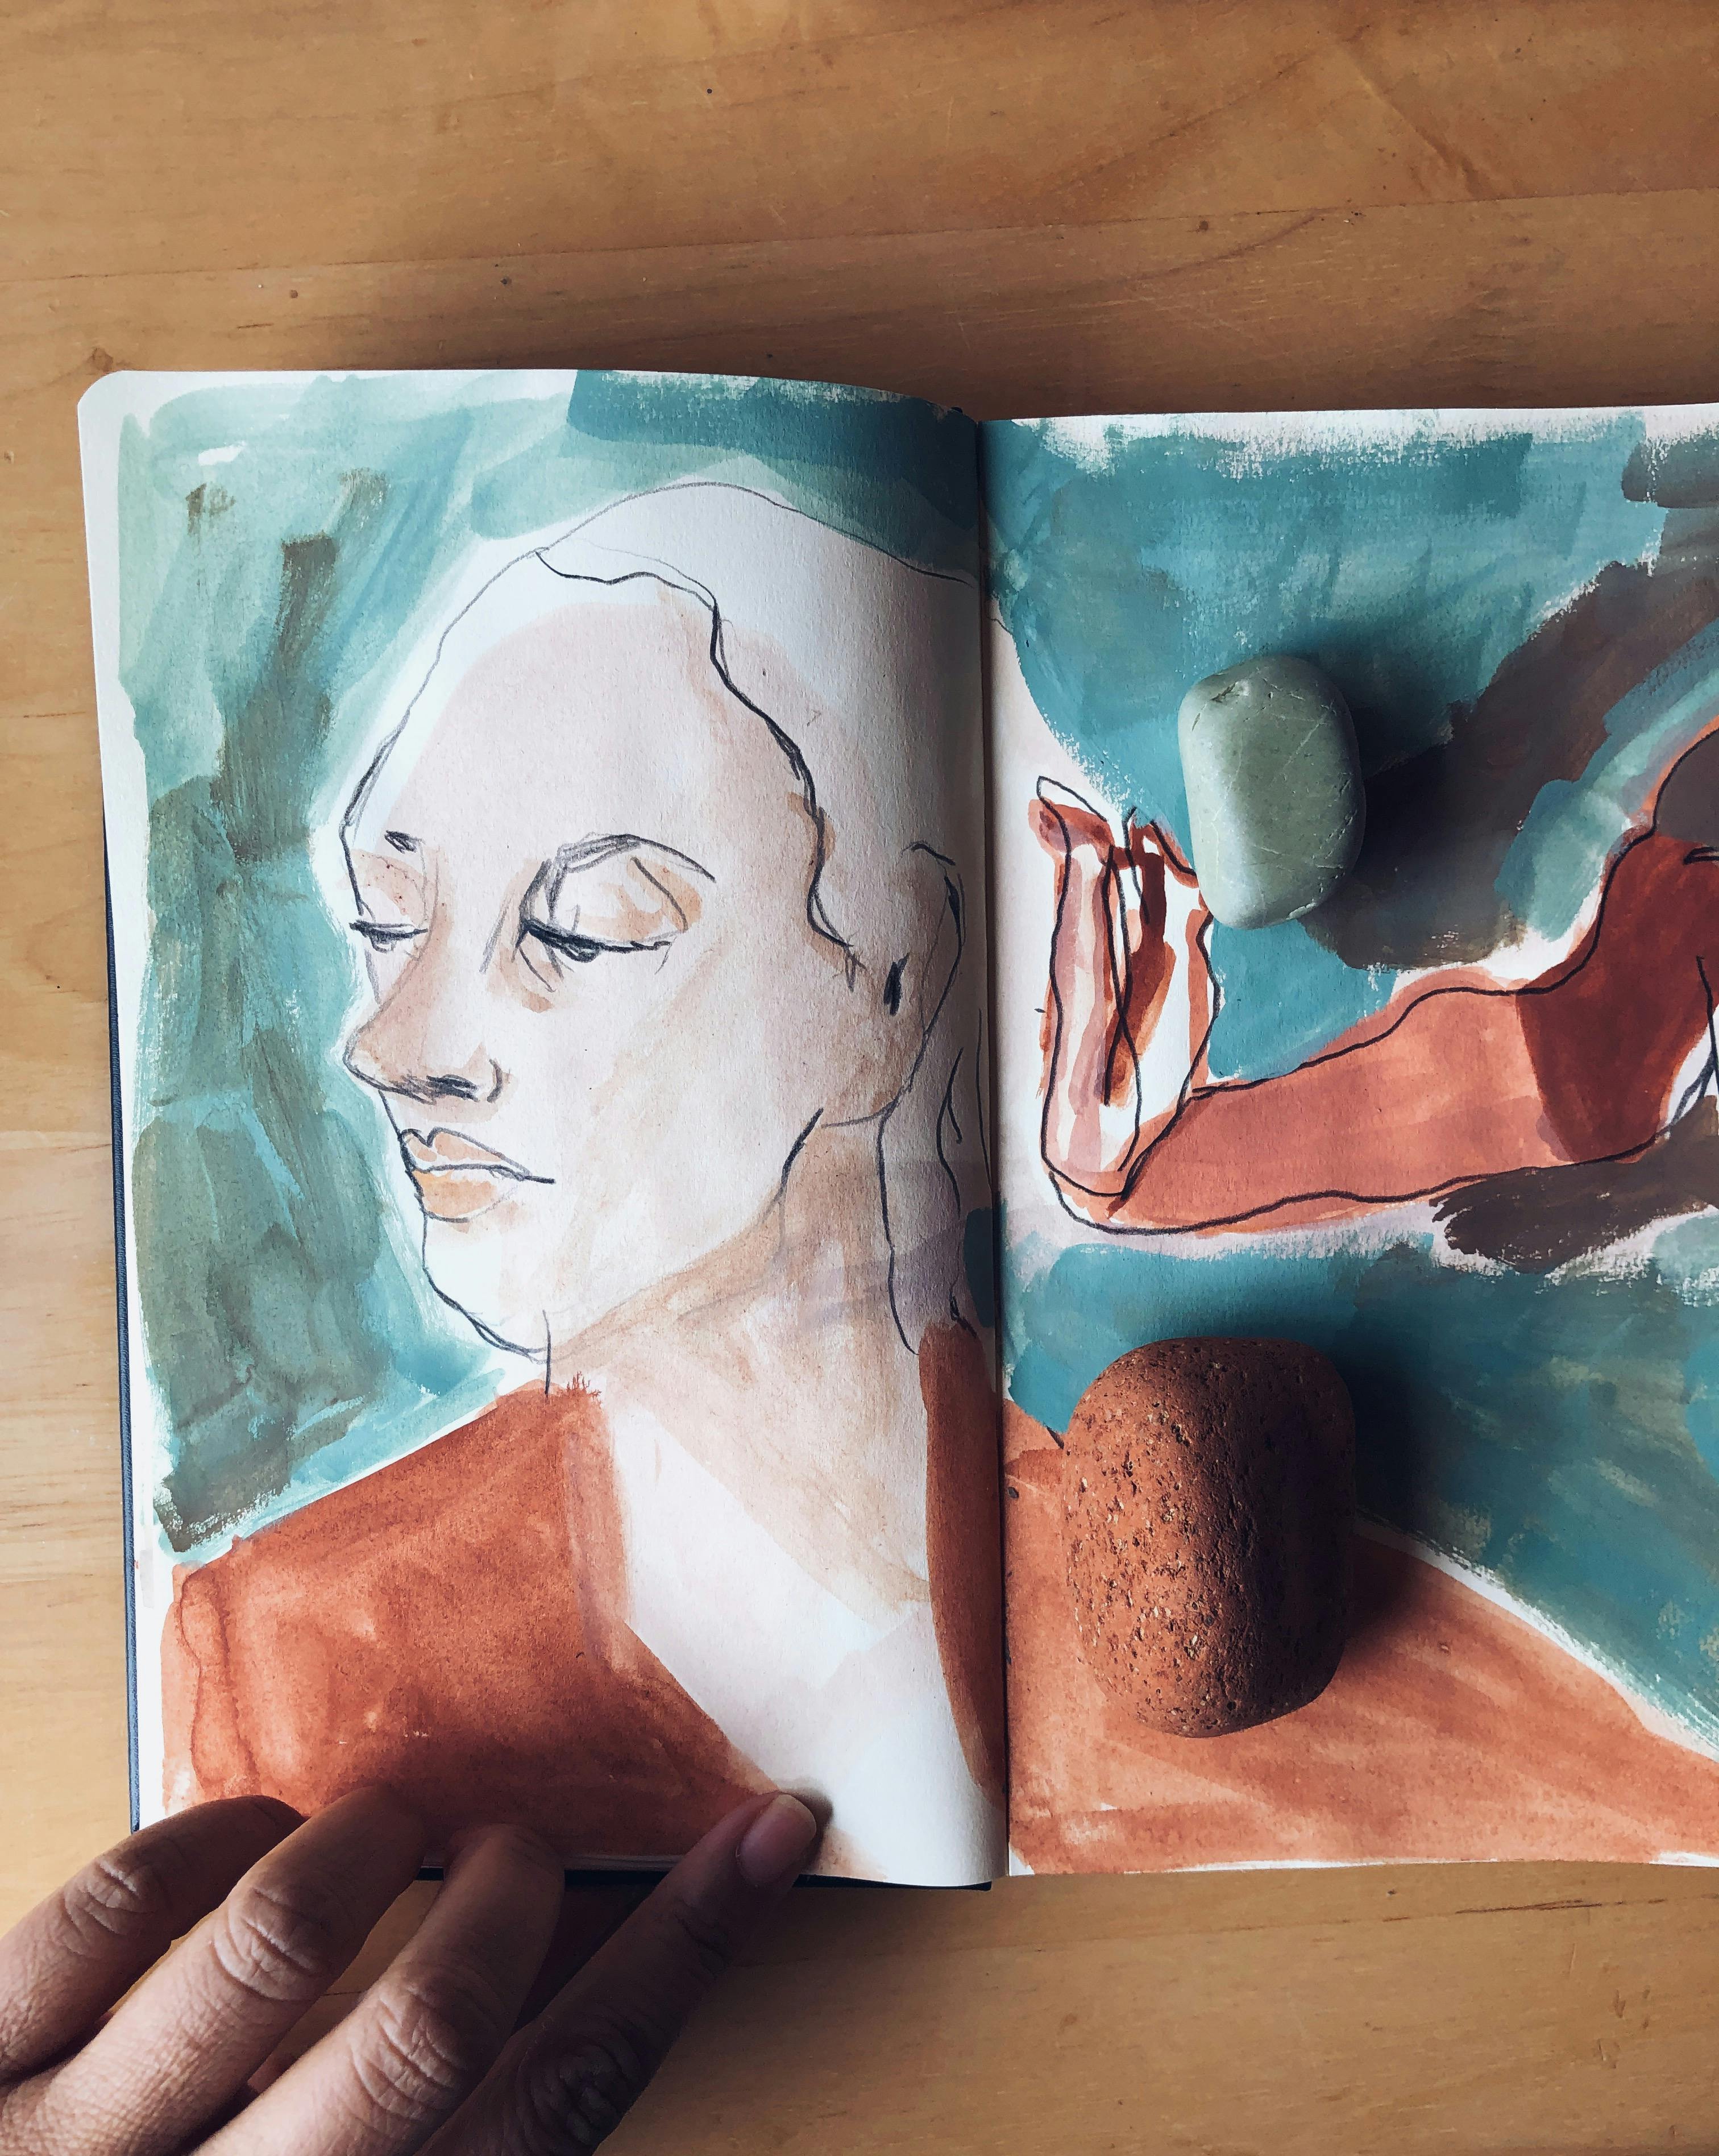 A sketchbook with a portrait of a woman